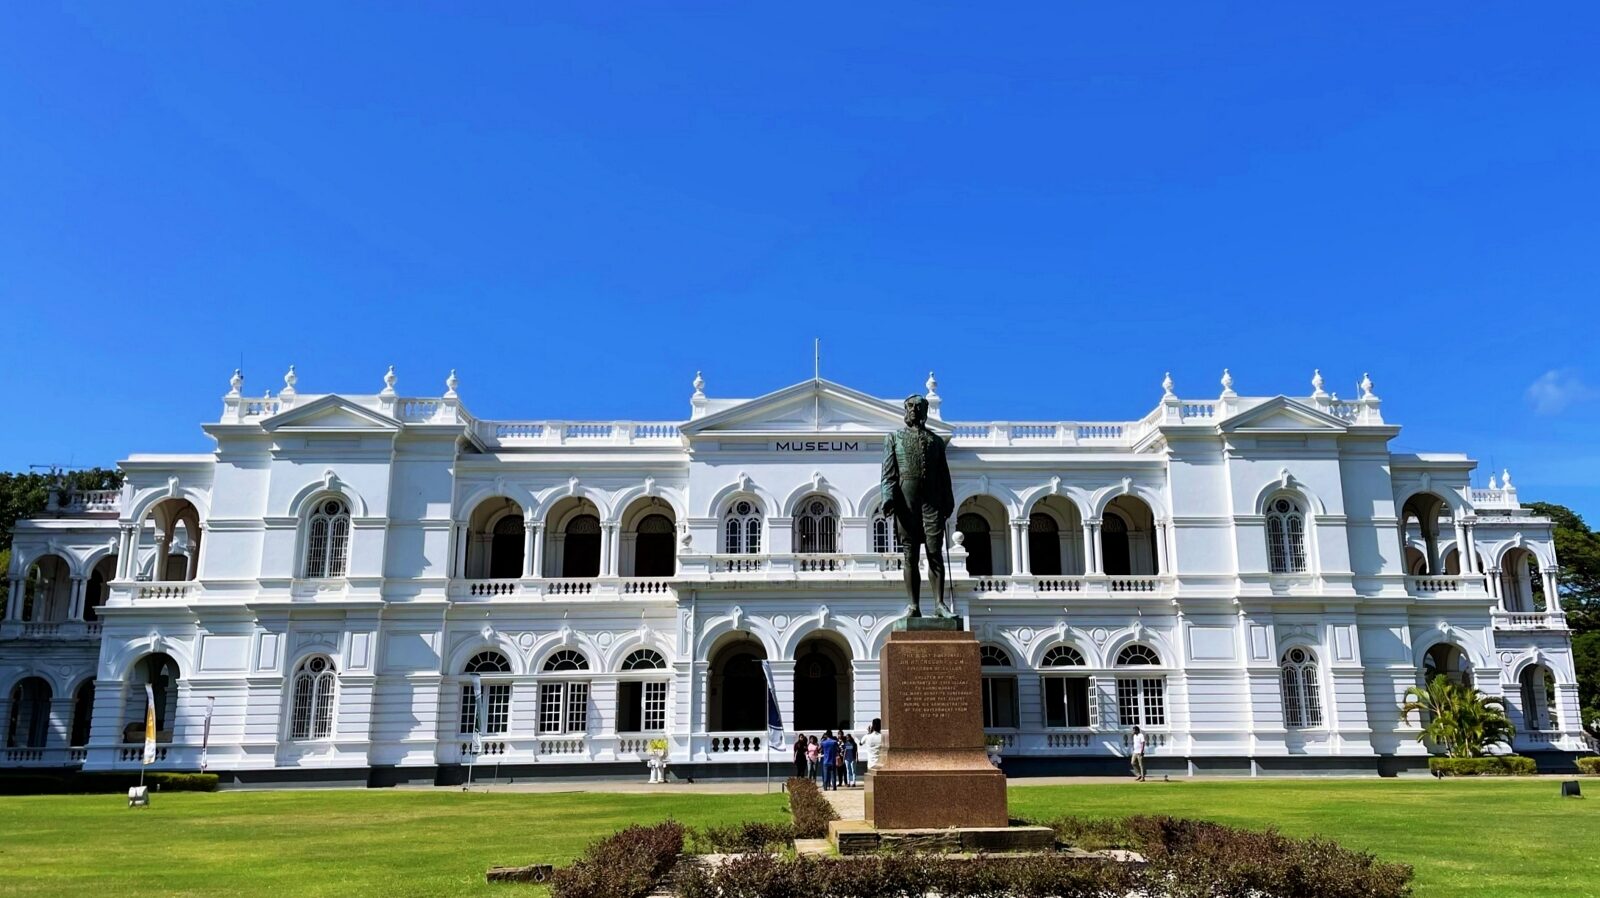 Colombo National Museum: Learn about Sri Lanka